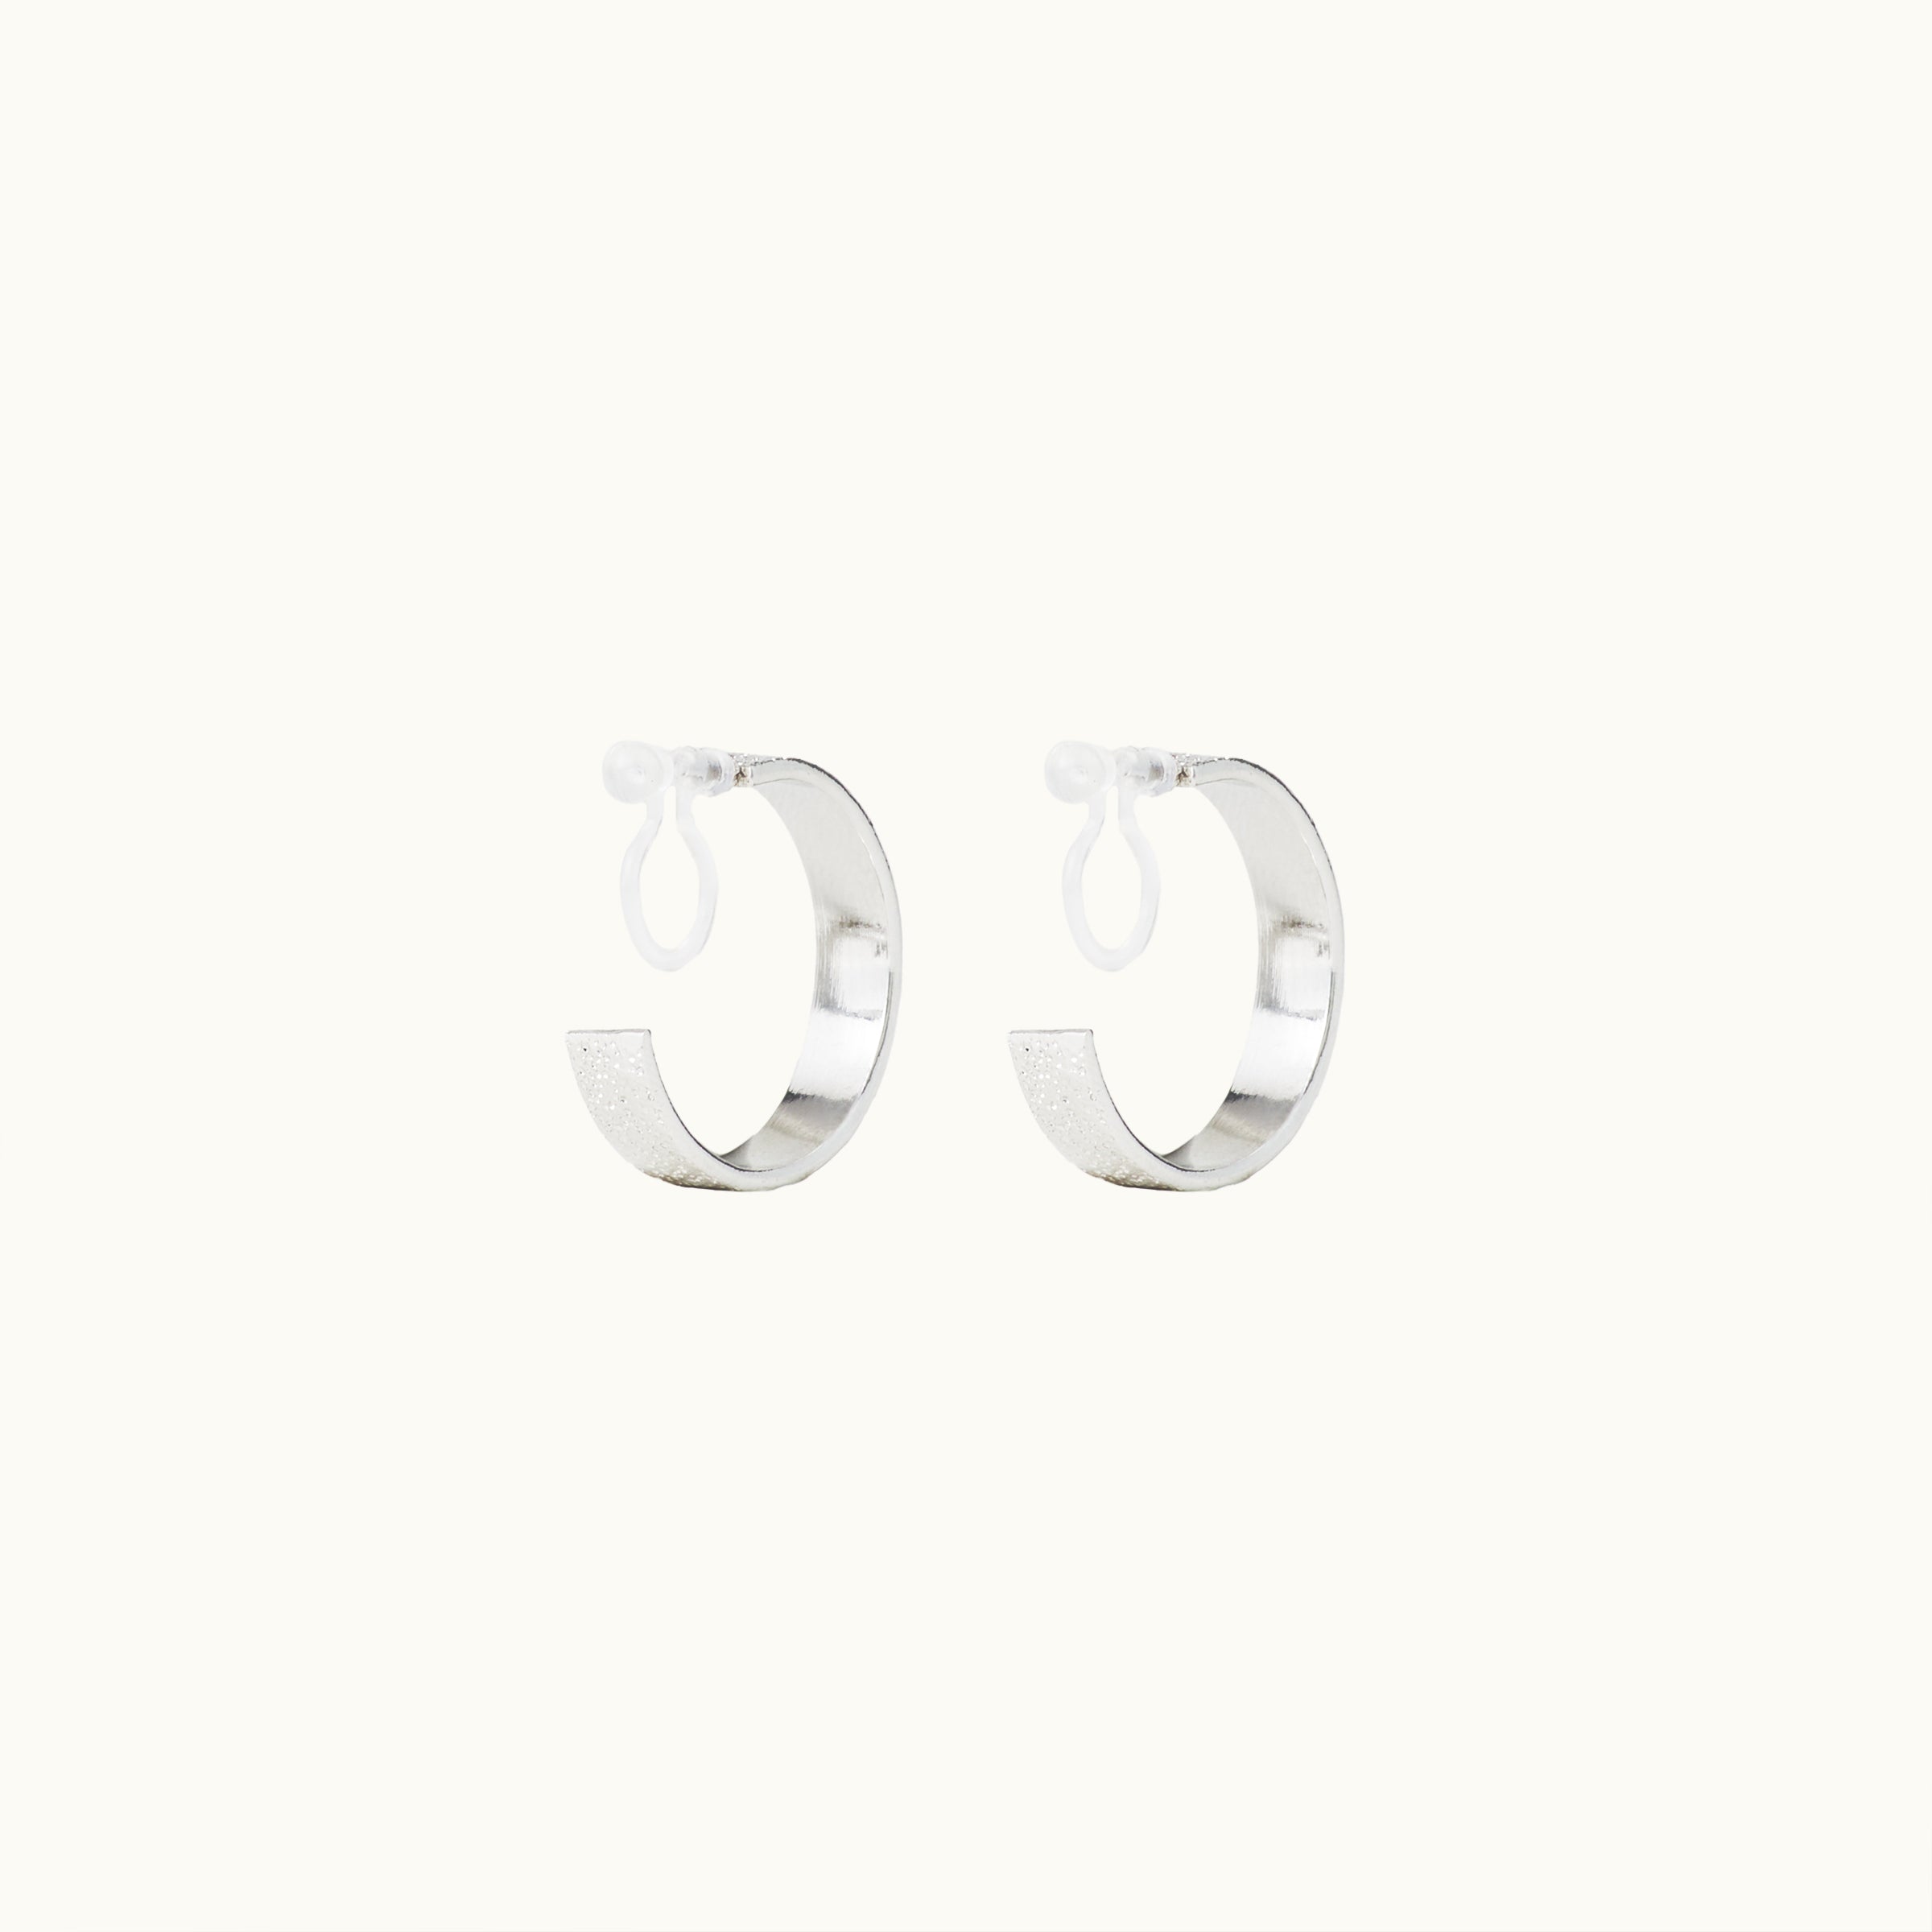 Image of the Speckled Hoop Clip On Earrings in Silver offer versatility and comfort for a range of ear sizes and sensitivities. With a medium secure hold, you can confidently wear them for 8-12 hours. Sold as a pair.